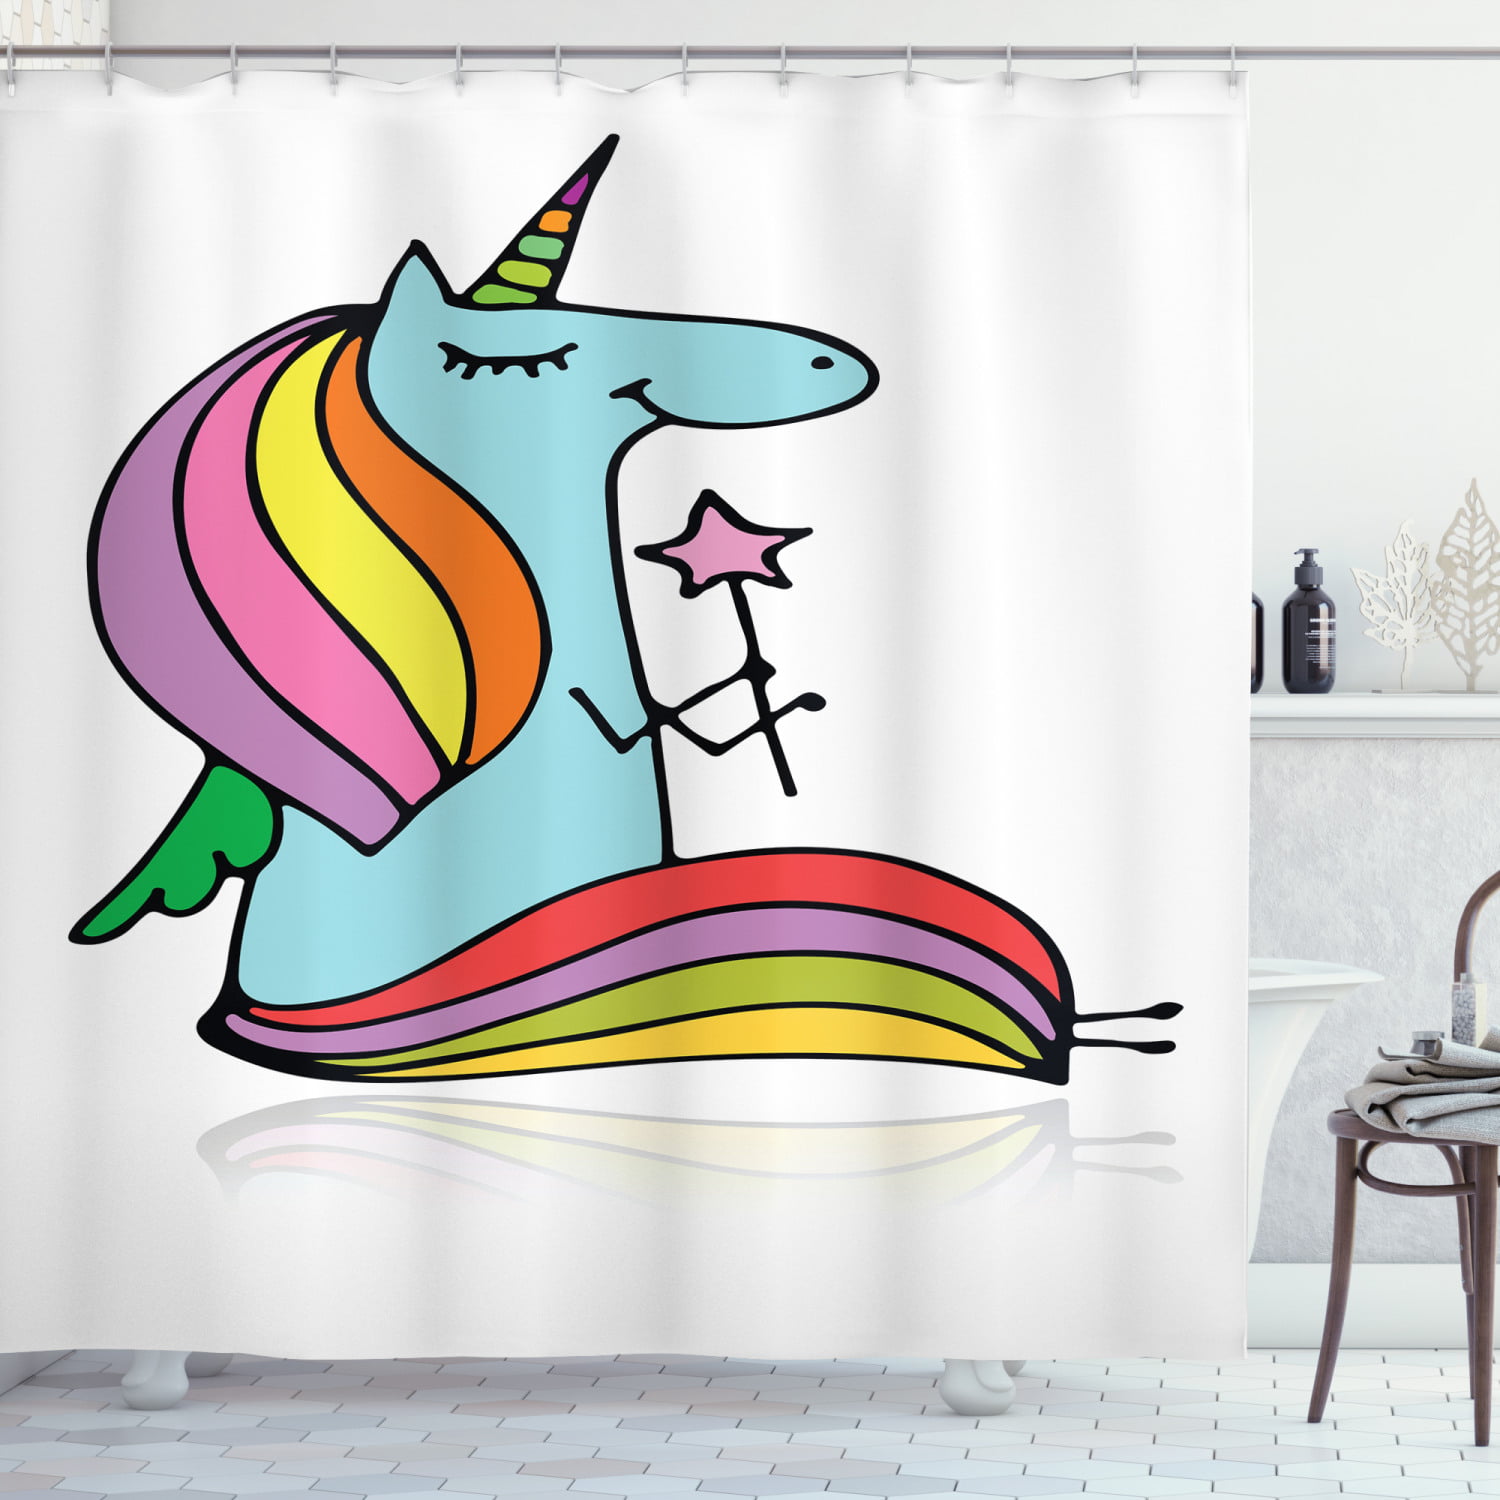 Magical Shower Curtain set Funny Unicorn And Cat Bathroom Curtain With Hooks 71" 